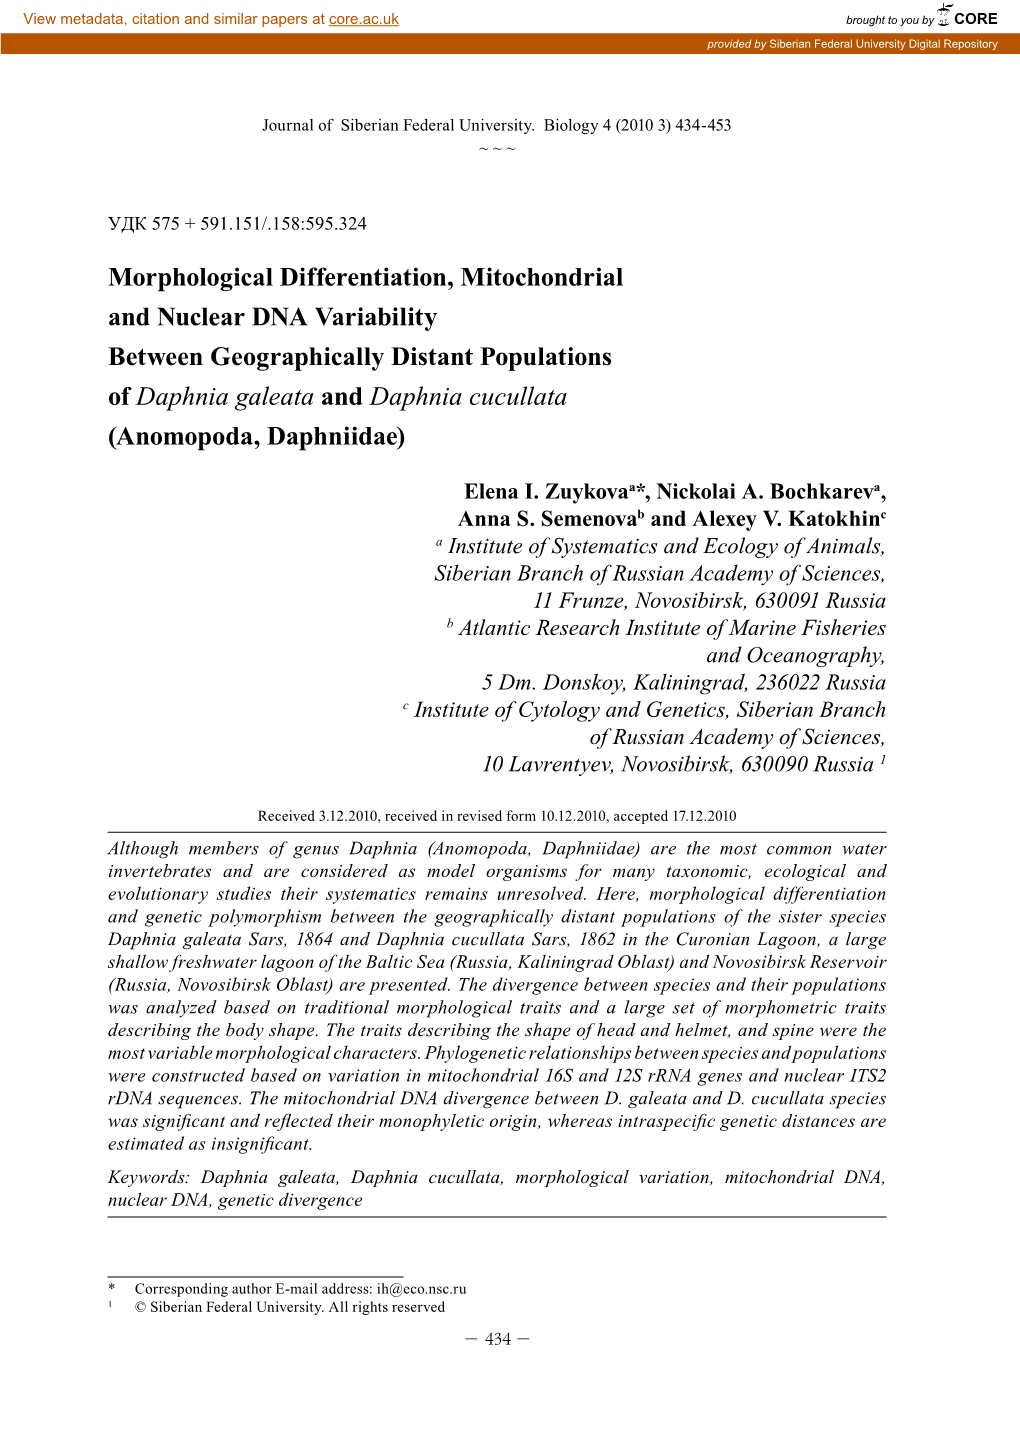 Morphological Differentiation, Mitochondrial and Nuclear DNA